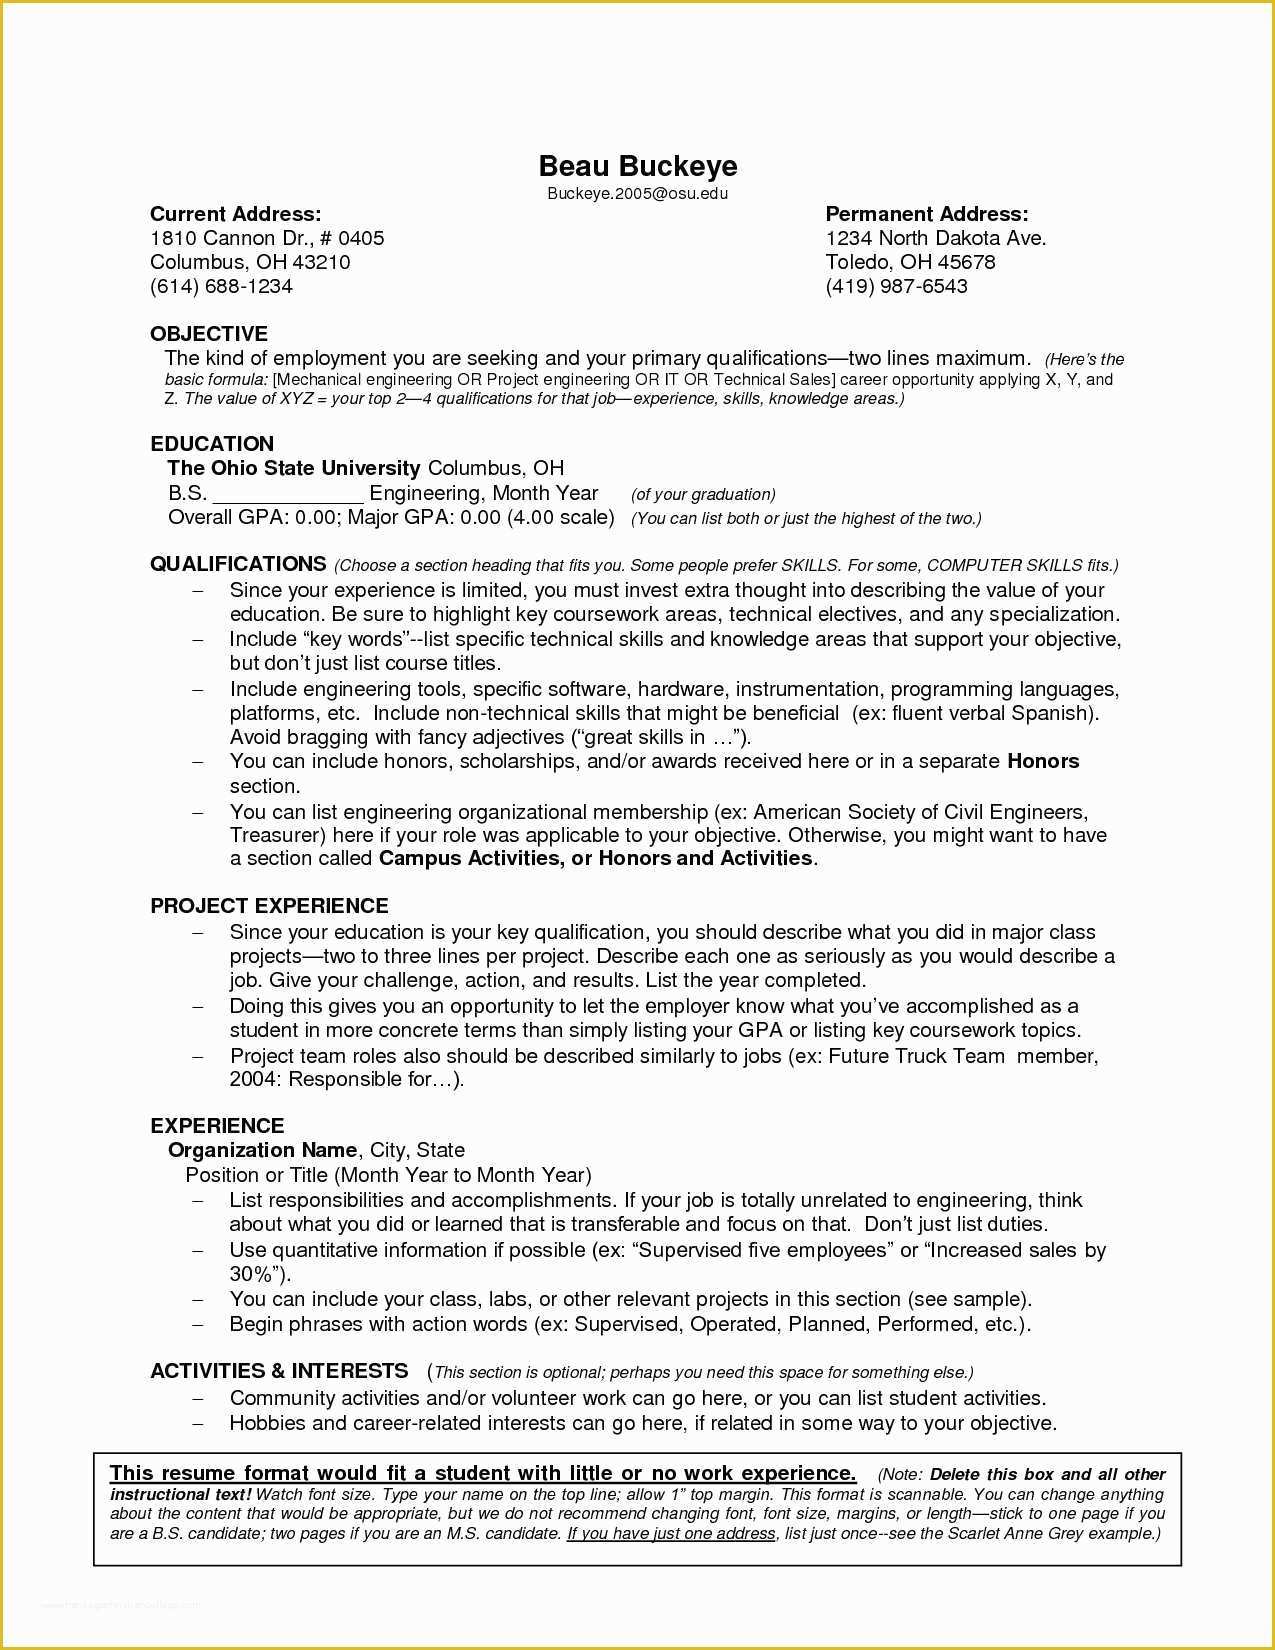 Free Resume Templates for No Work Experience Of Resume Template Work Study Resume Template Fabulous